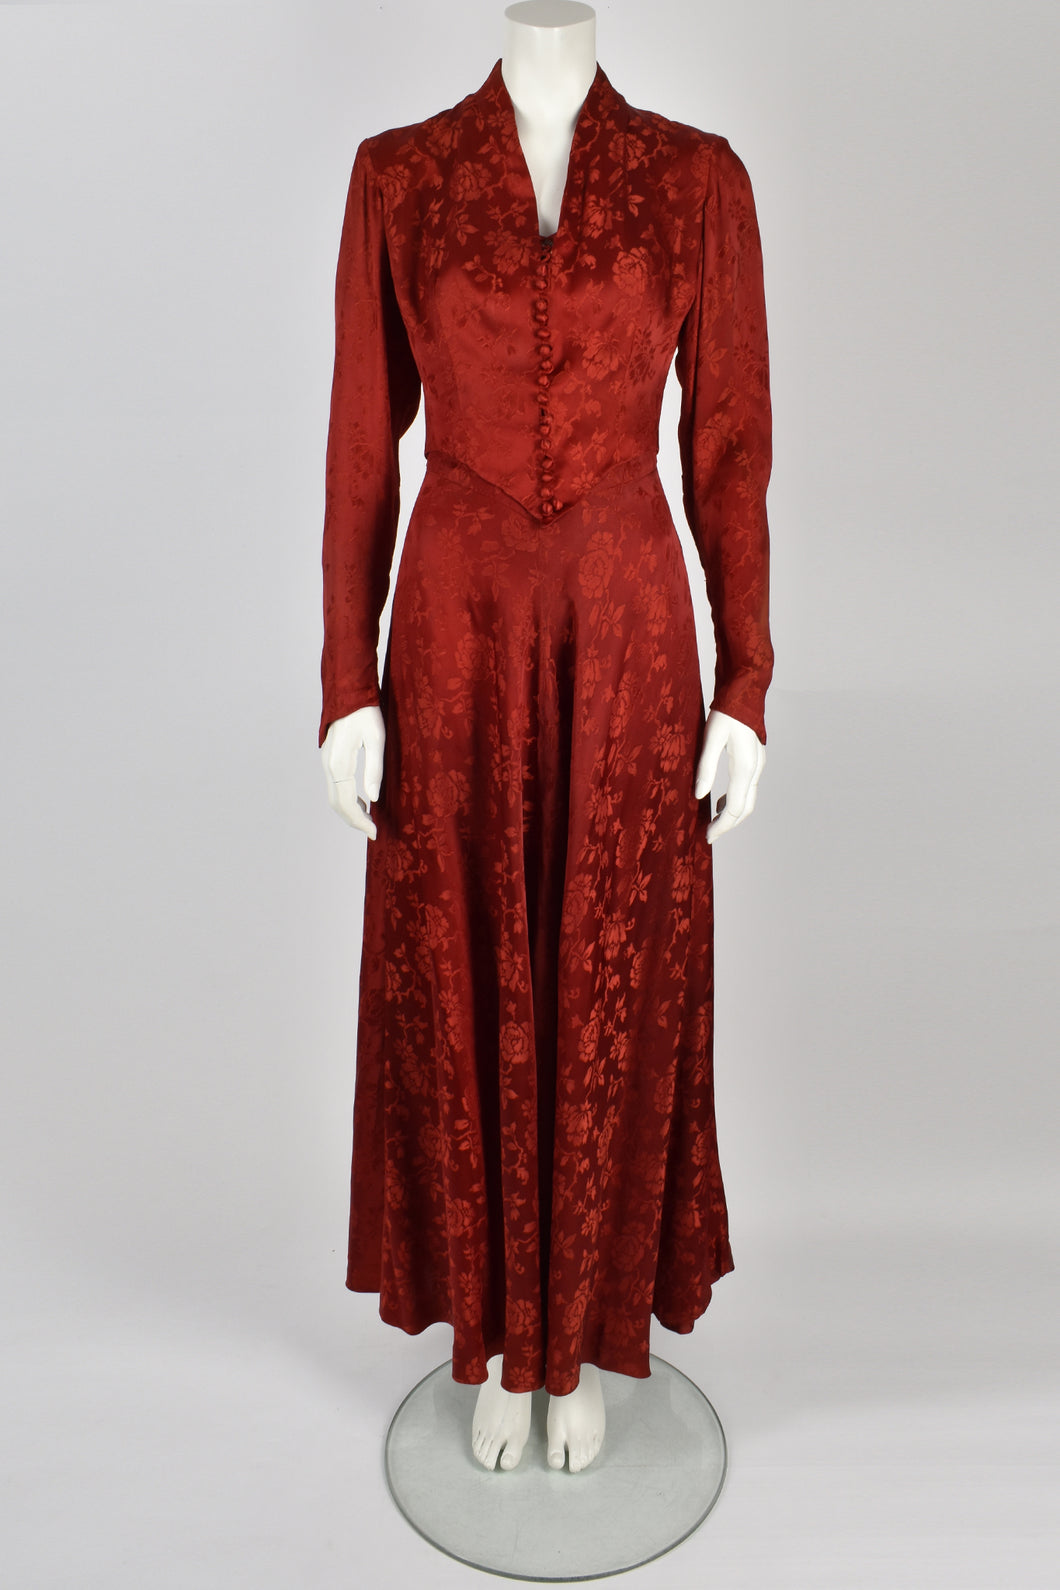 30's Red Jacquard floral dress with jacket